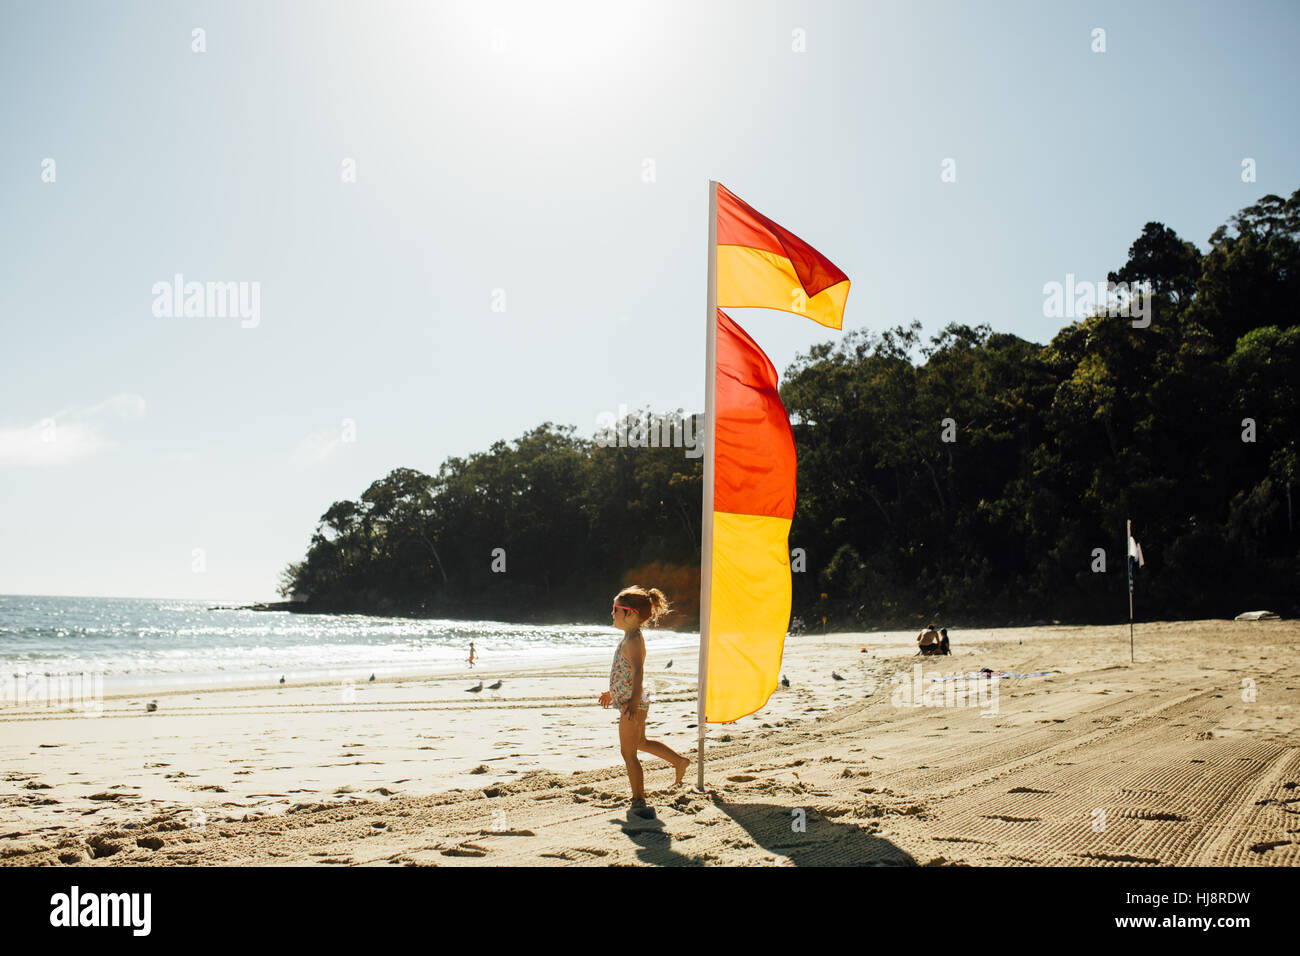 Girl on beach walking by life saver flags Stock Photo